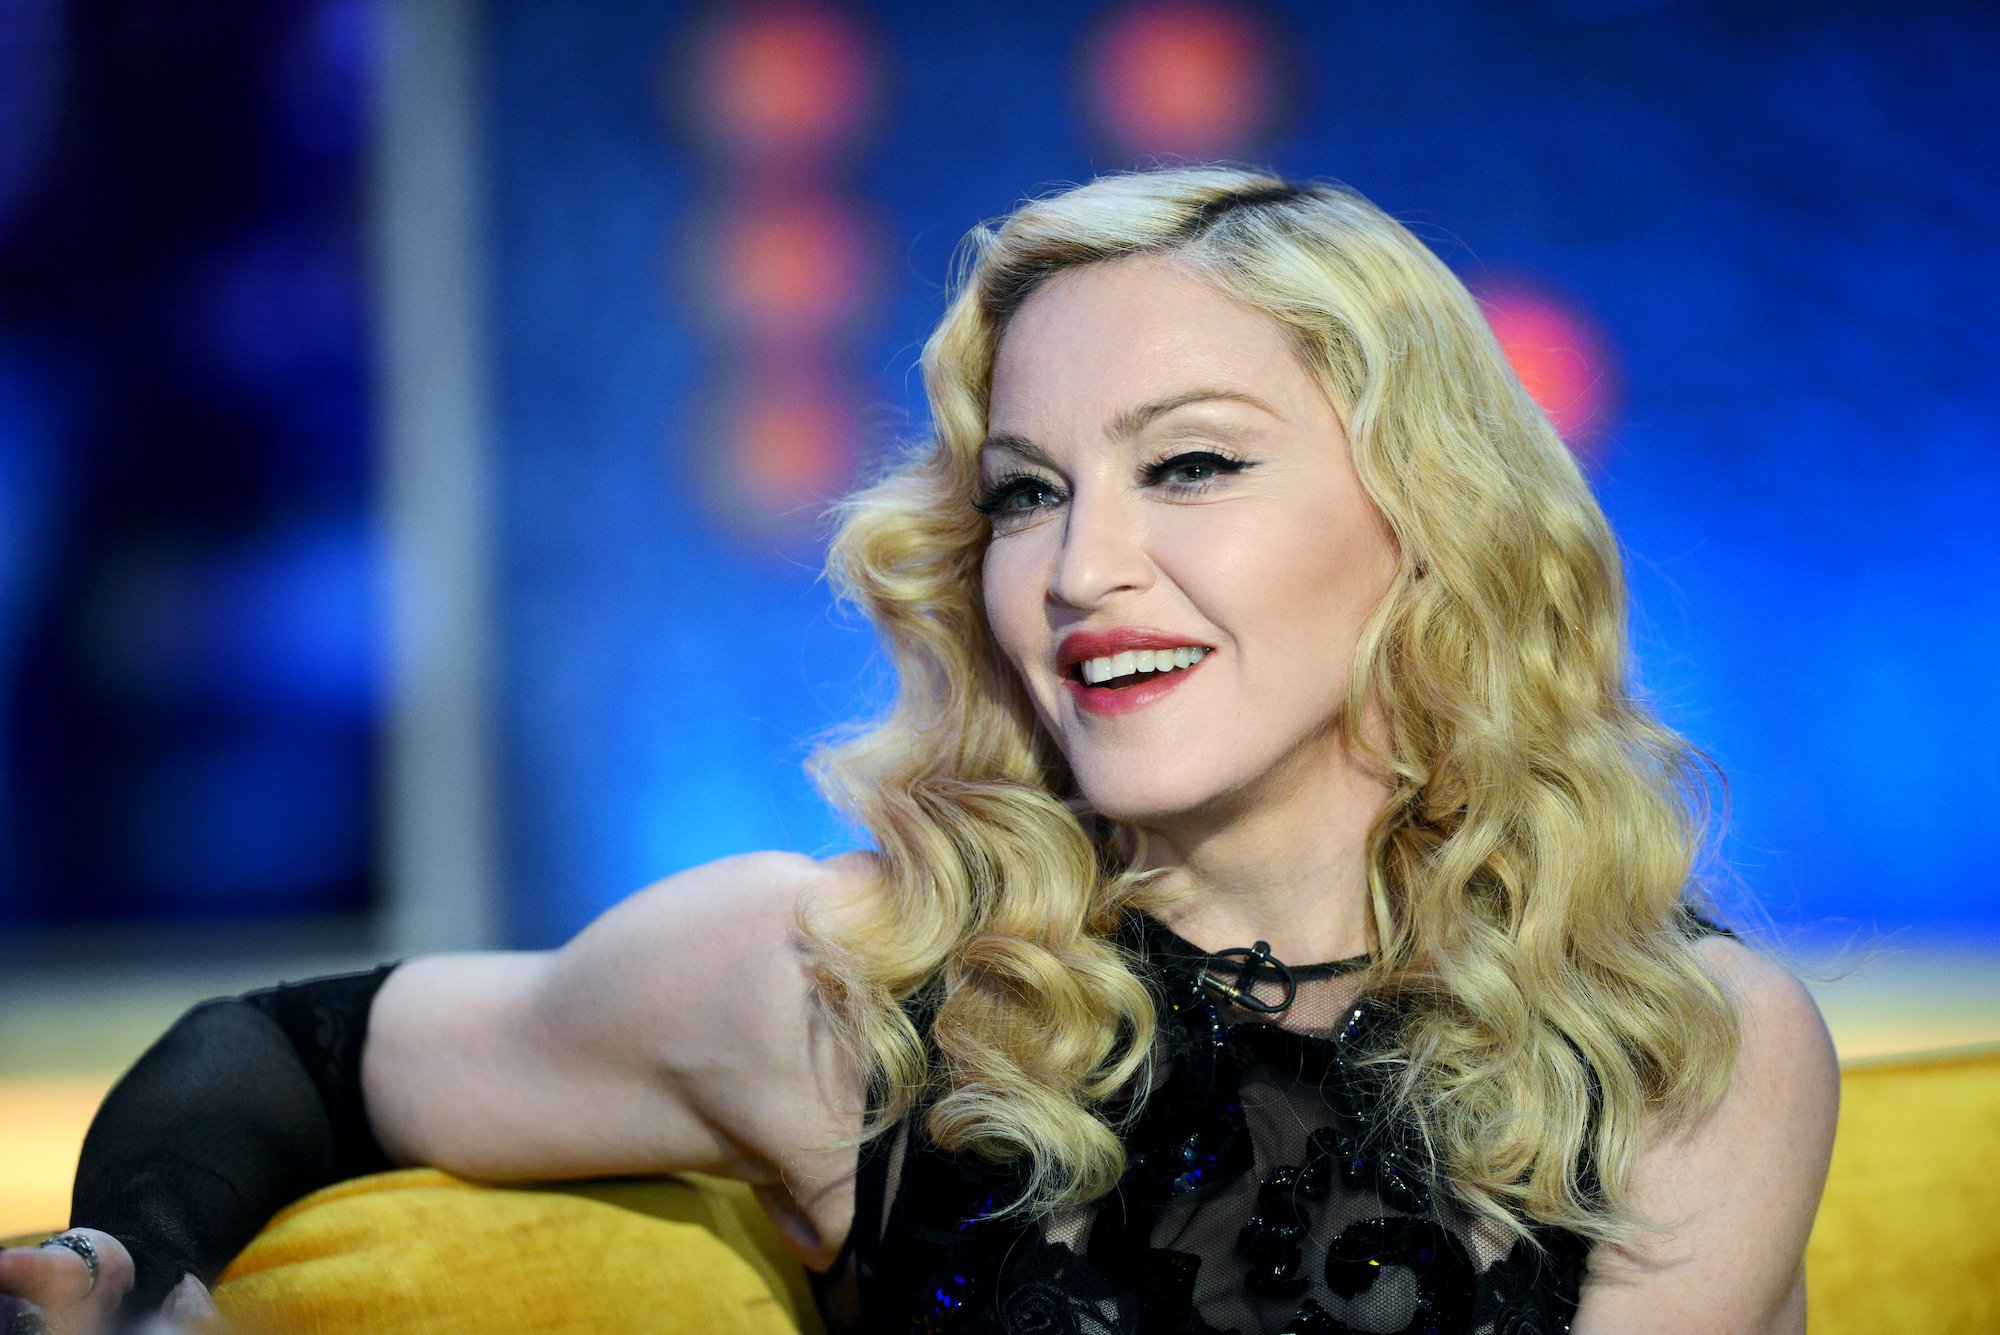 What Is The Age Difference Between Madonna And Her Boyfriend Ahlamalik Williams